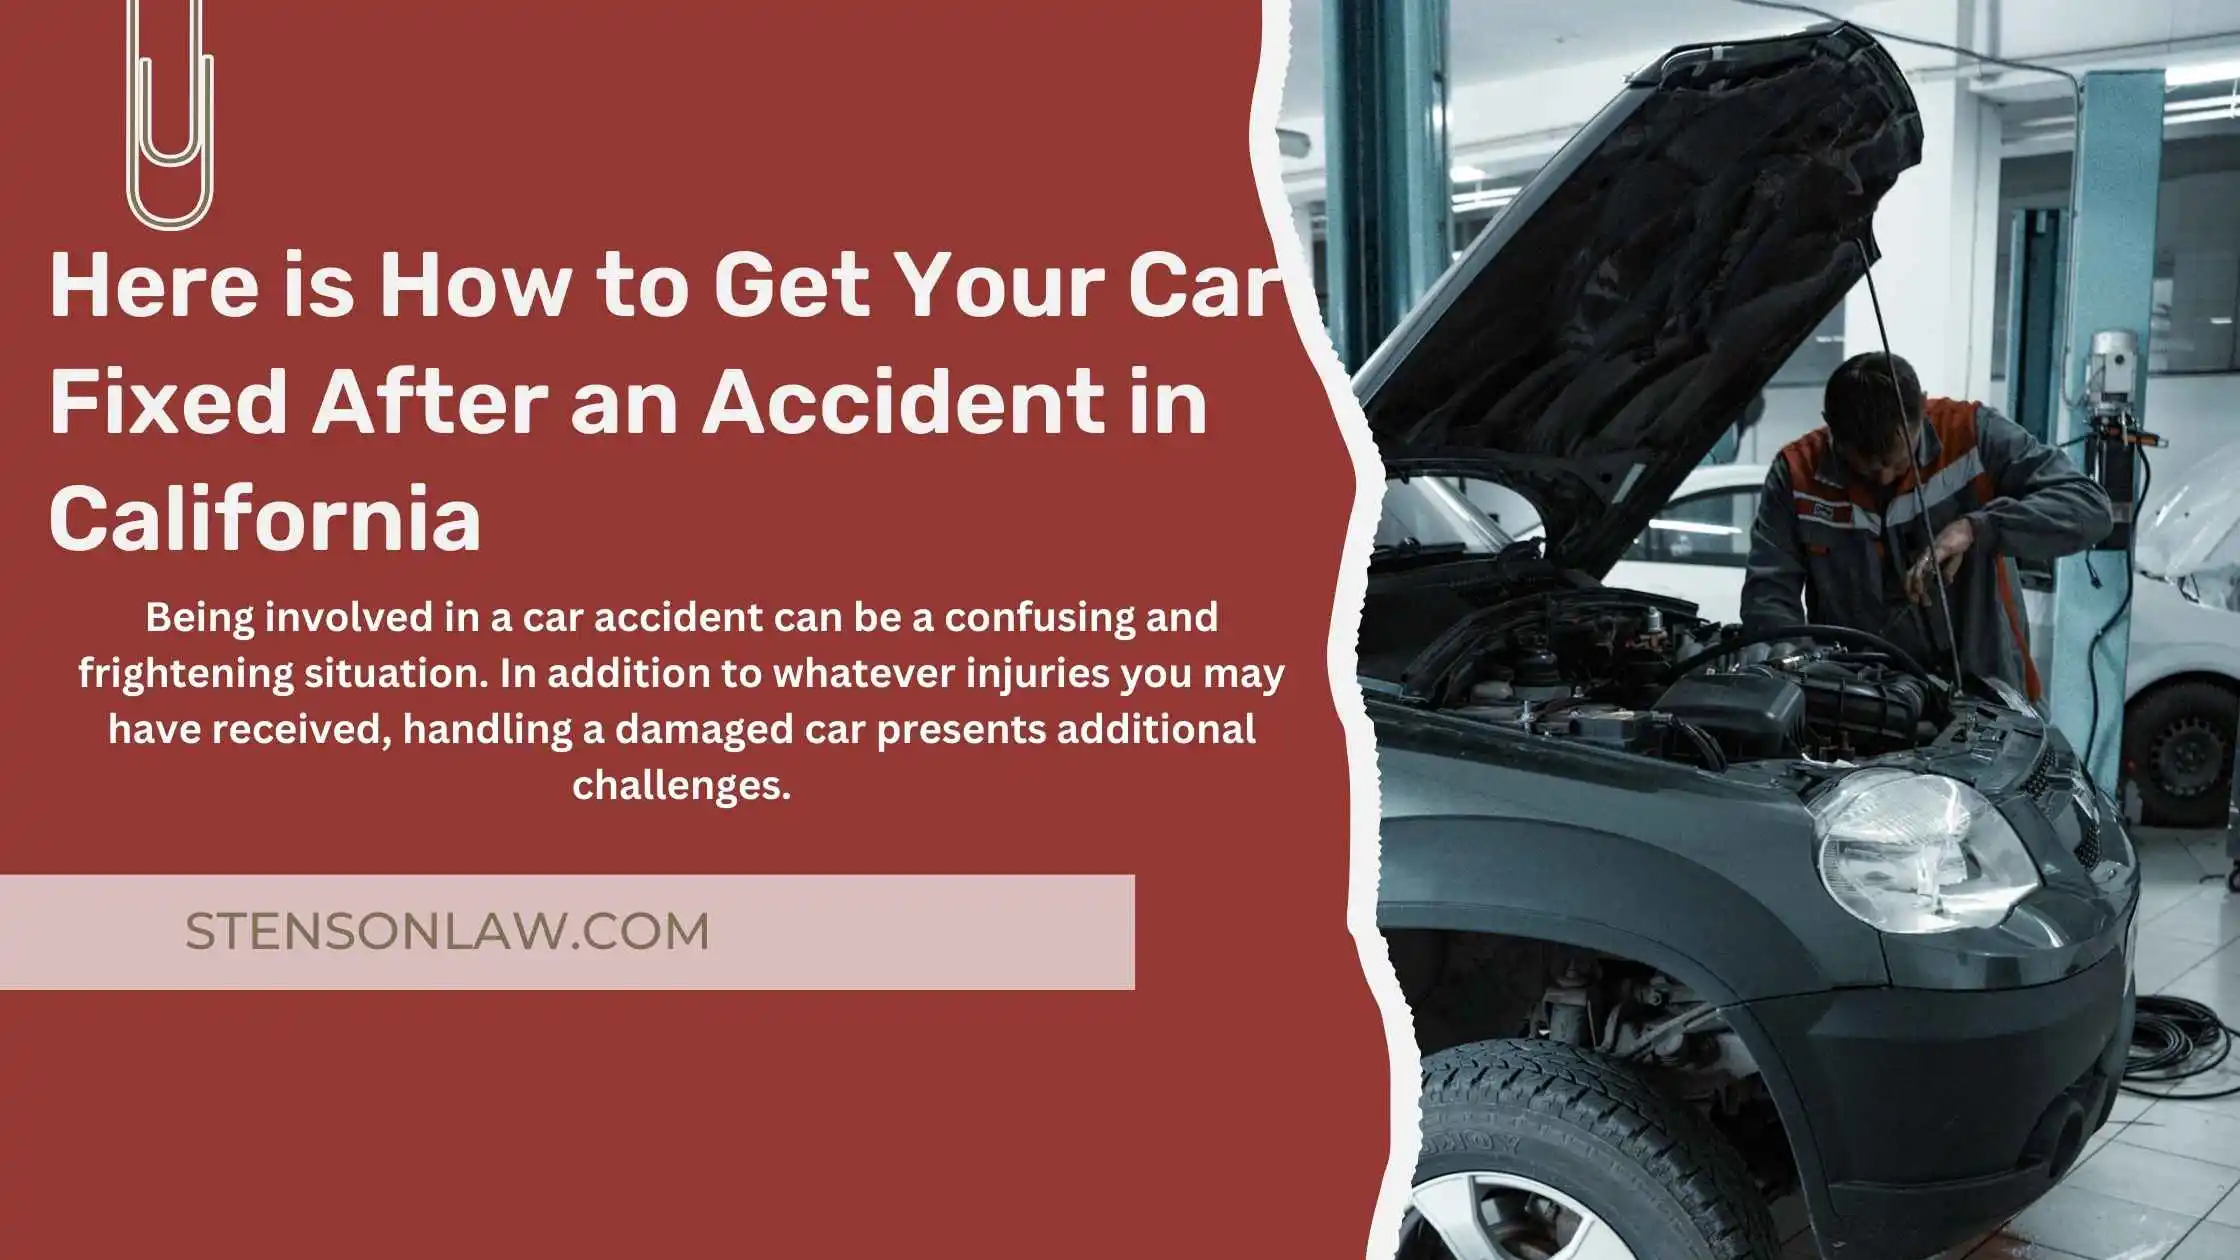 Here is How to Get Your Car Fixed After an Accident in California